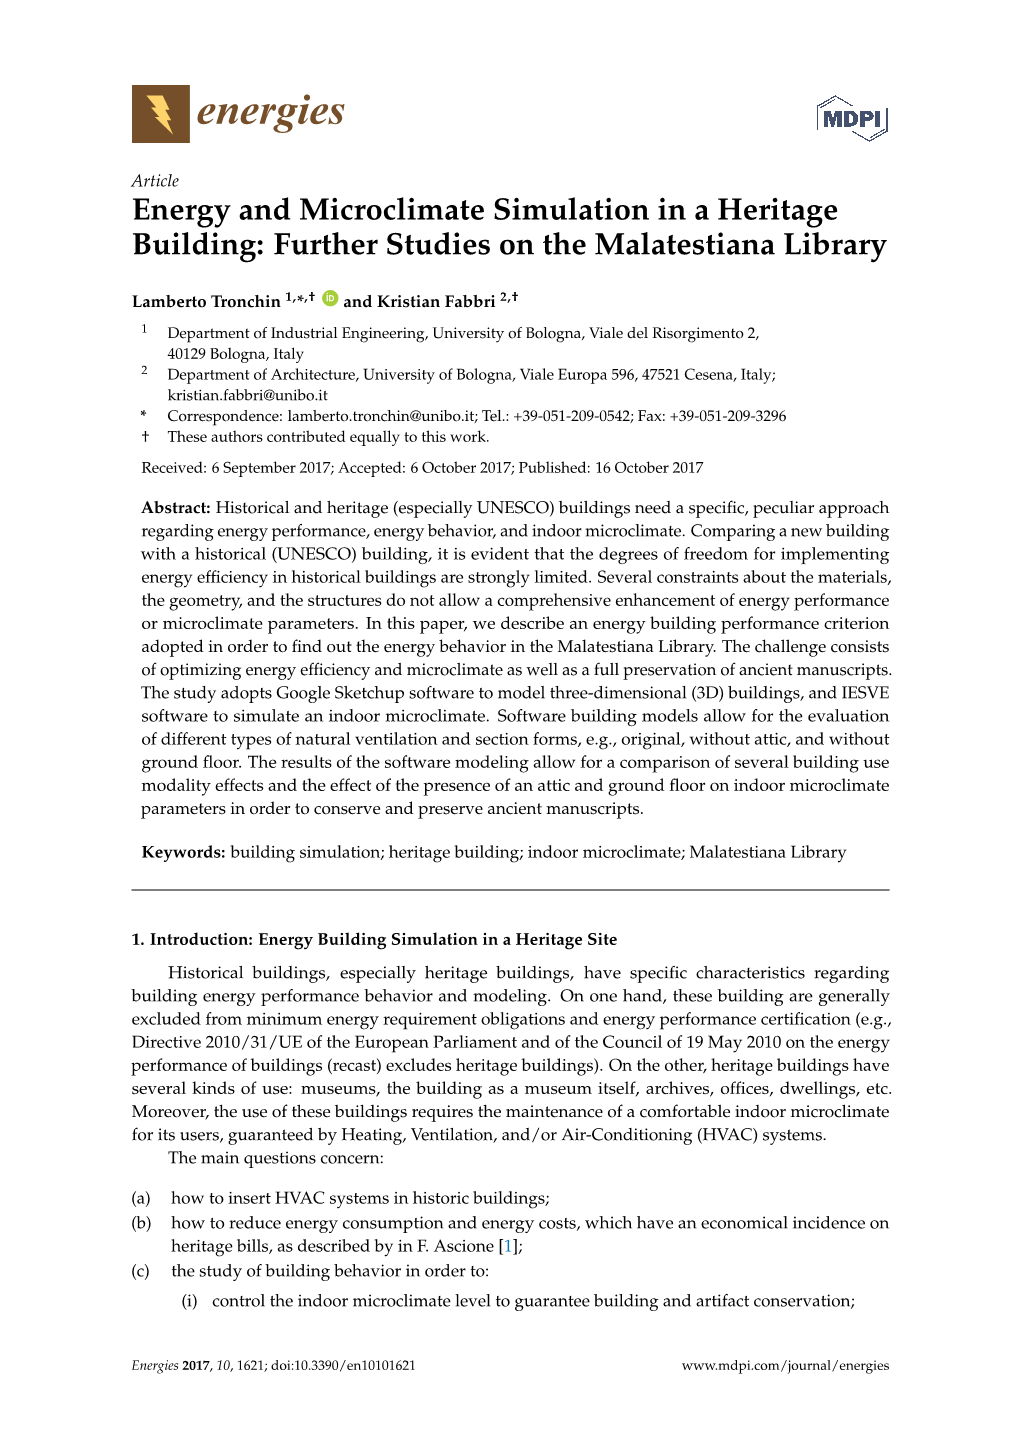 Energy and Microclimate Simulation in a Heritage Building: Further Studies on the Malatestiana Library